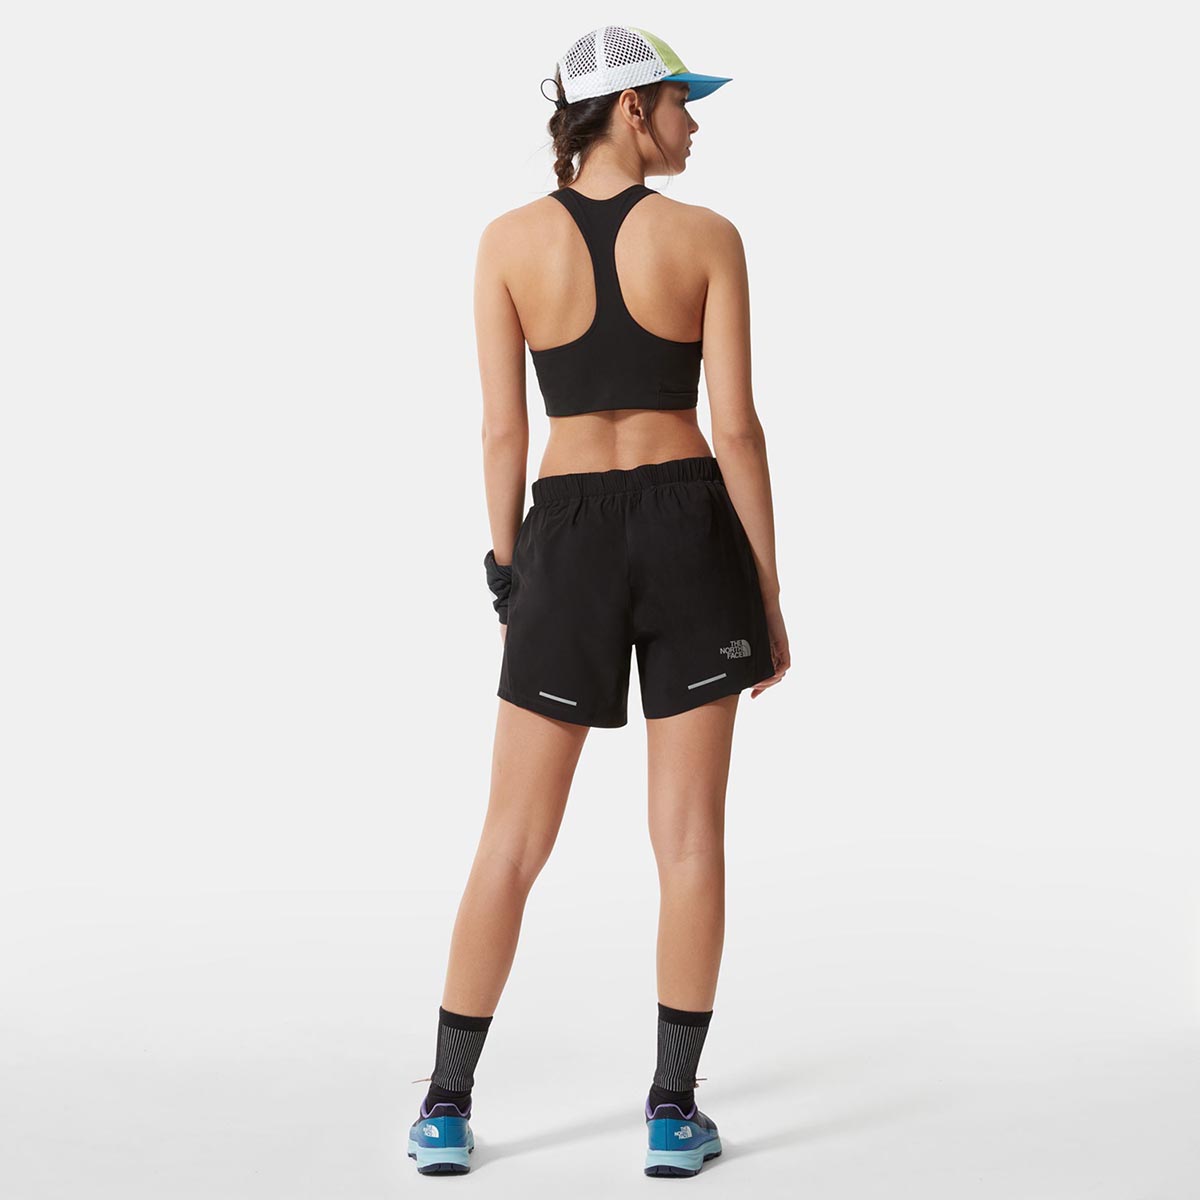 THE NORTH FACE - 2-IN-1 SHORTS